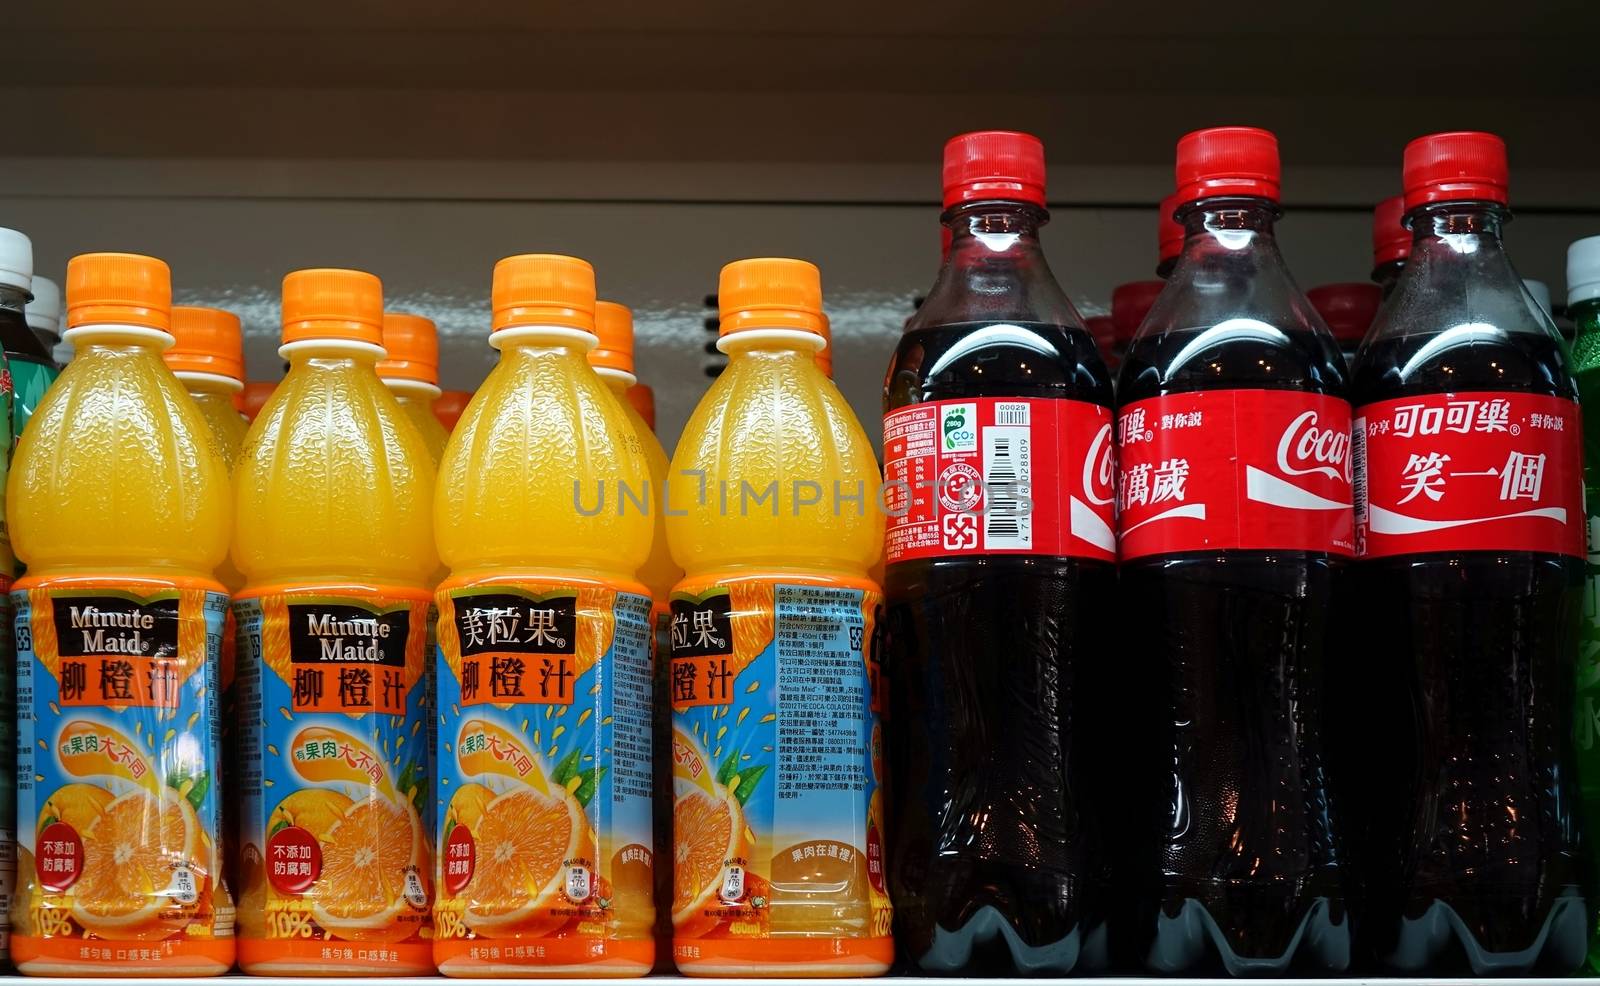 KAOHSIUNG, TAIWAN -- MARCH 14, 2014: A stall selling cold drinks displays Minute Maid orange drinks and Coca Cola bottles on its shelf.